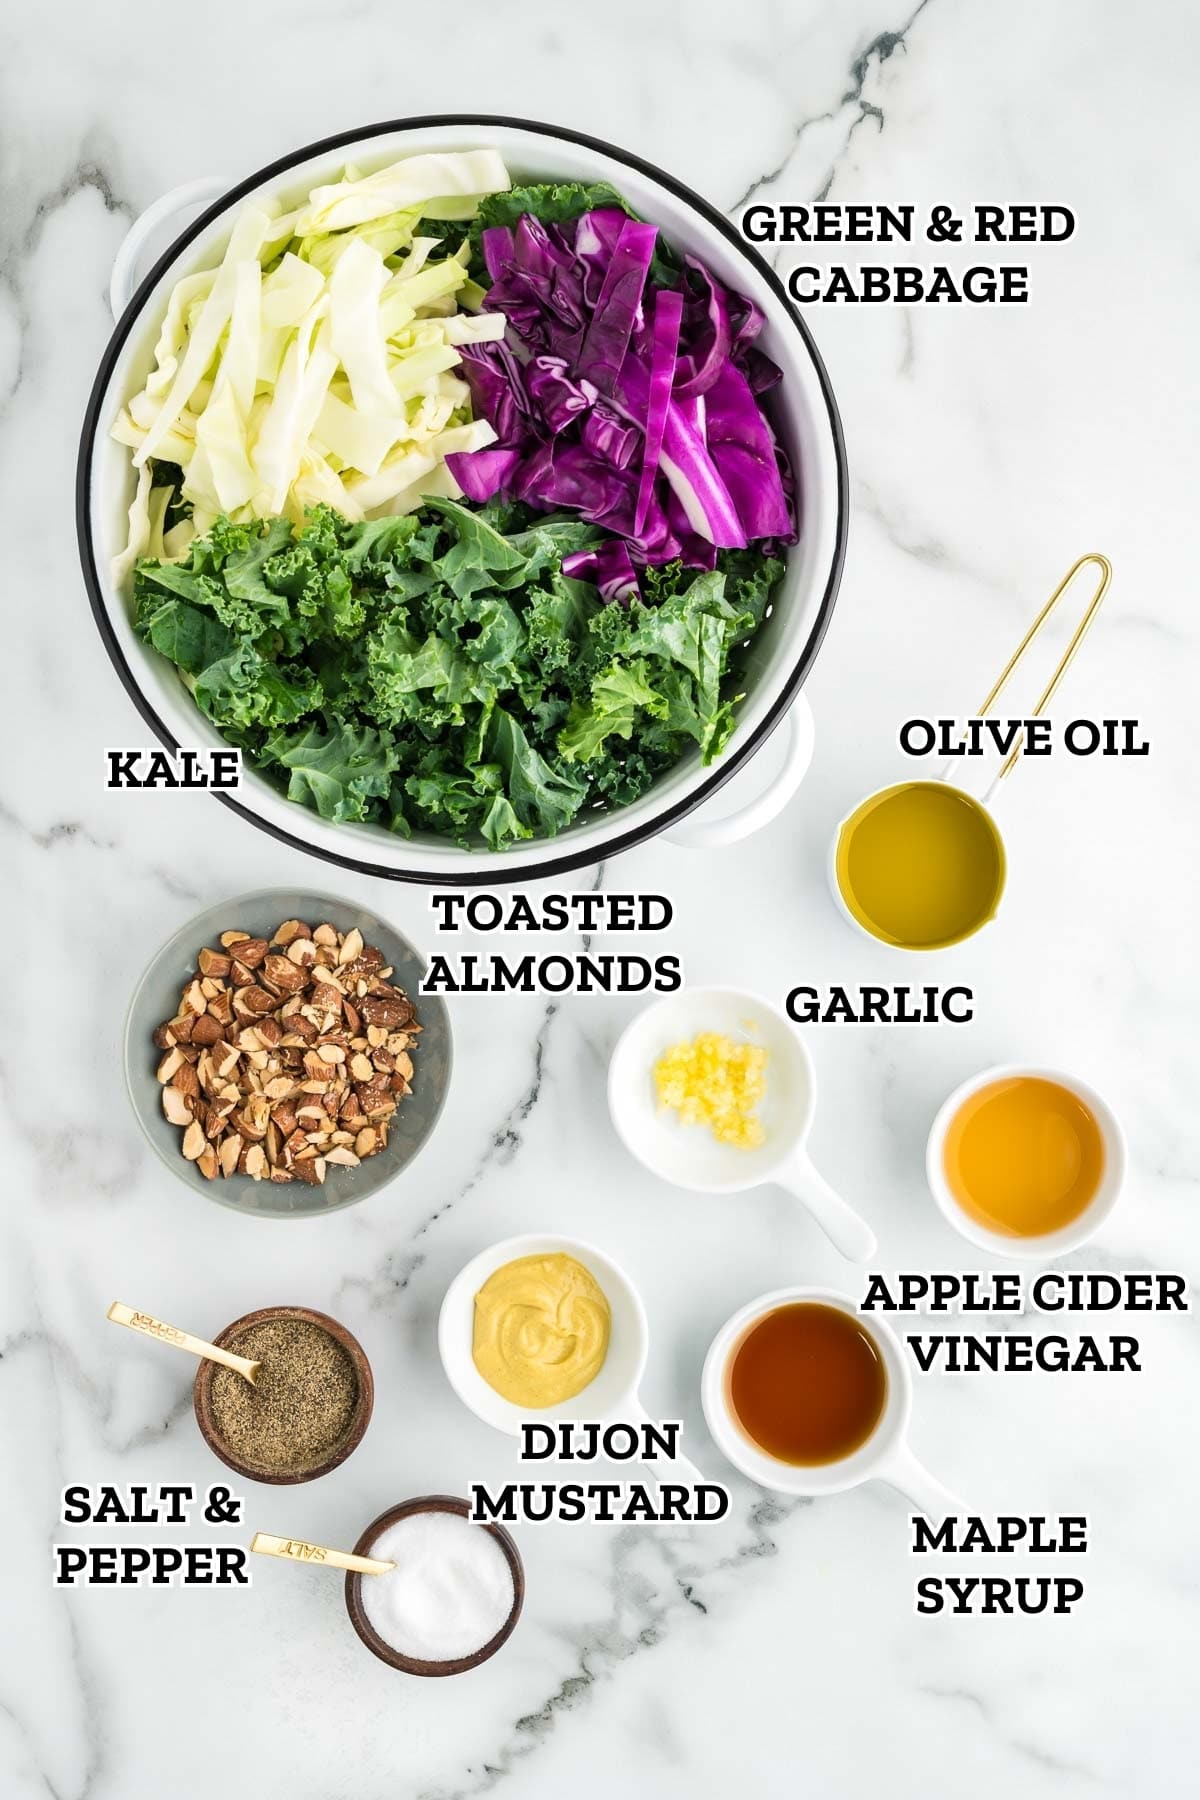 A labeled image of ingredients needed to make kale crunch salad.